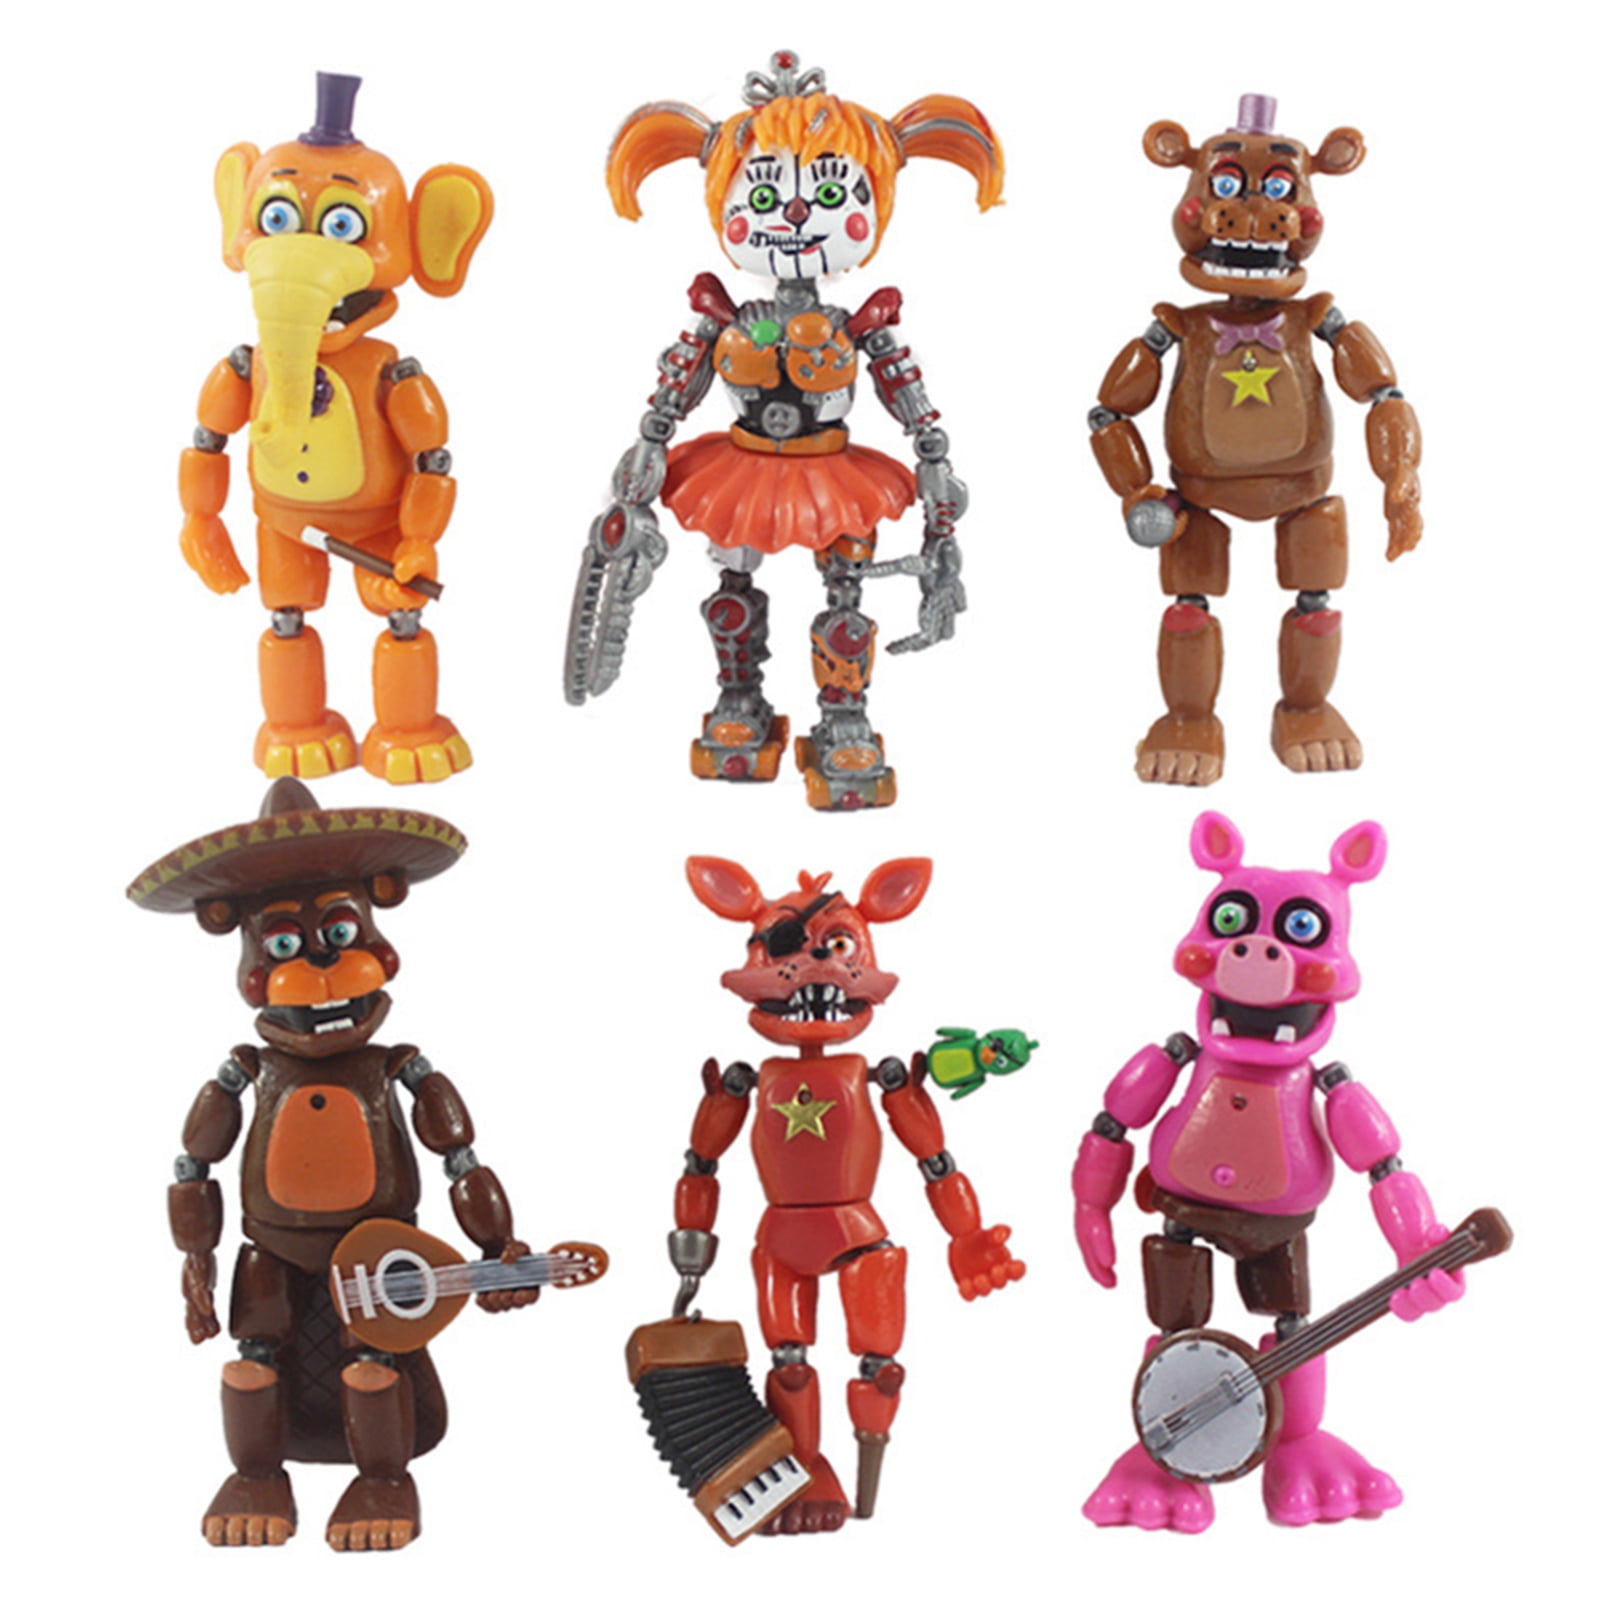 Life Made Better Fun Favorite Action Figures Green Case Long-Lasting LMB Accessory & Organizer Solid Design Light Box with Built-in Handle Works with Five Nights at Freddy Figures